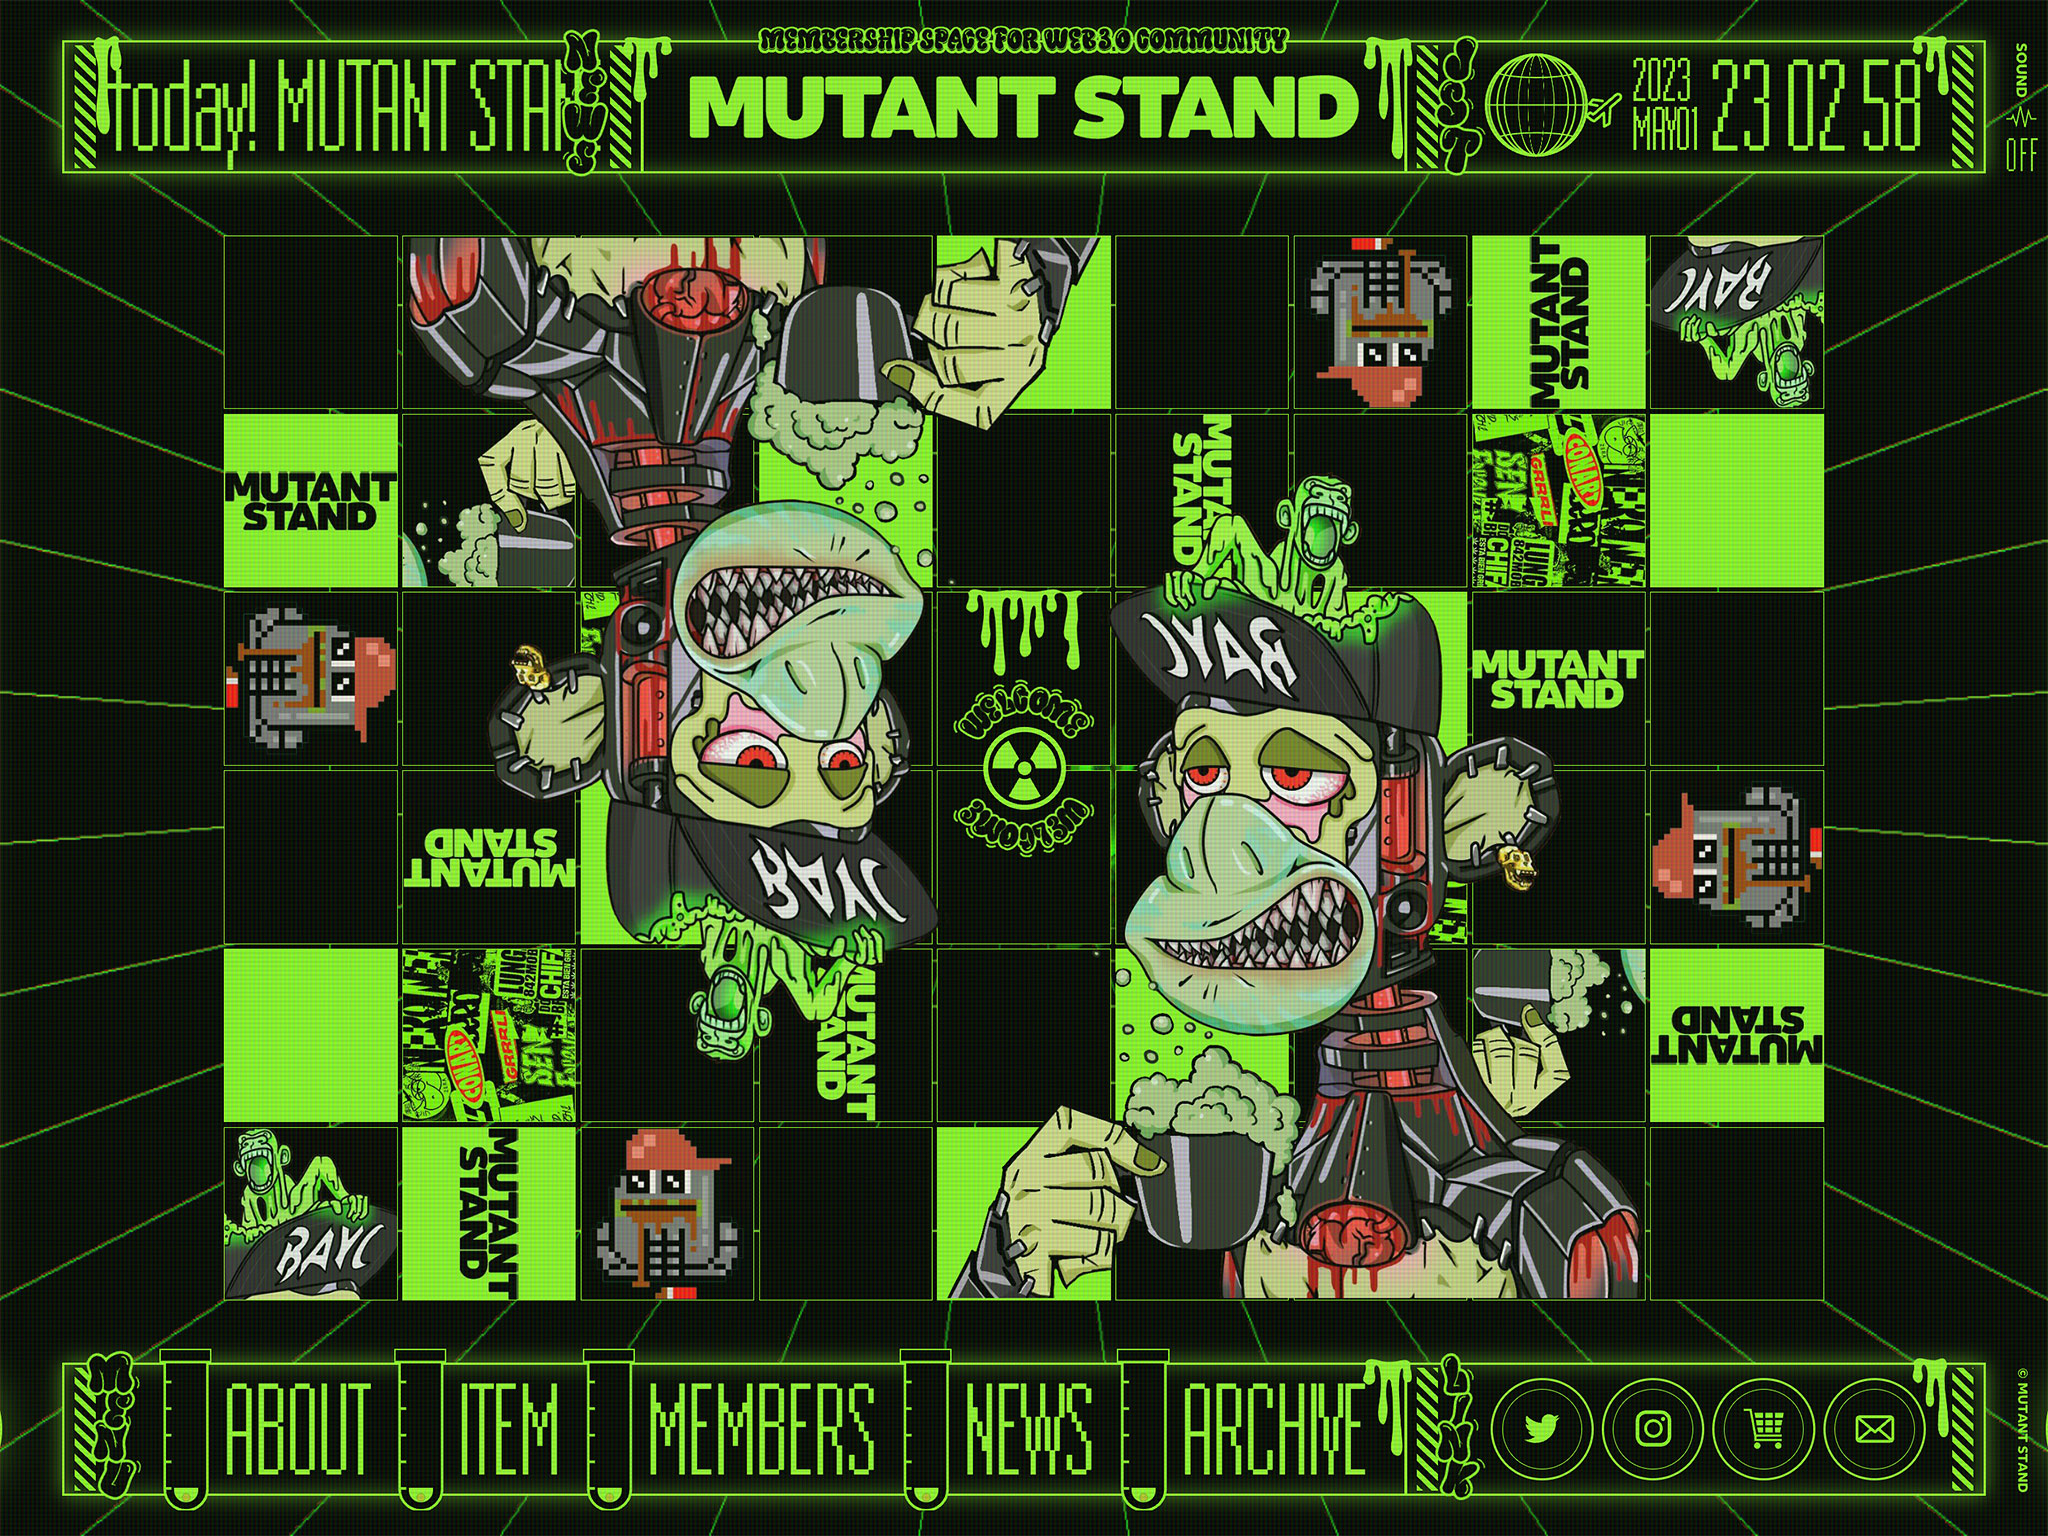 MUTANT STAND – Membership Space for WEB3.0 Community